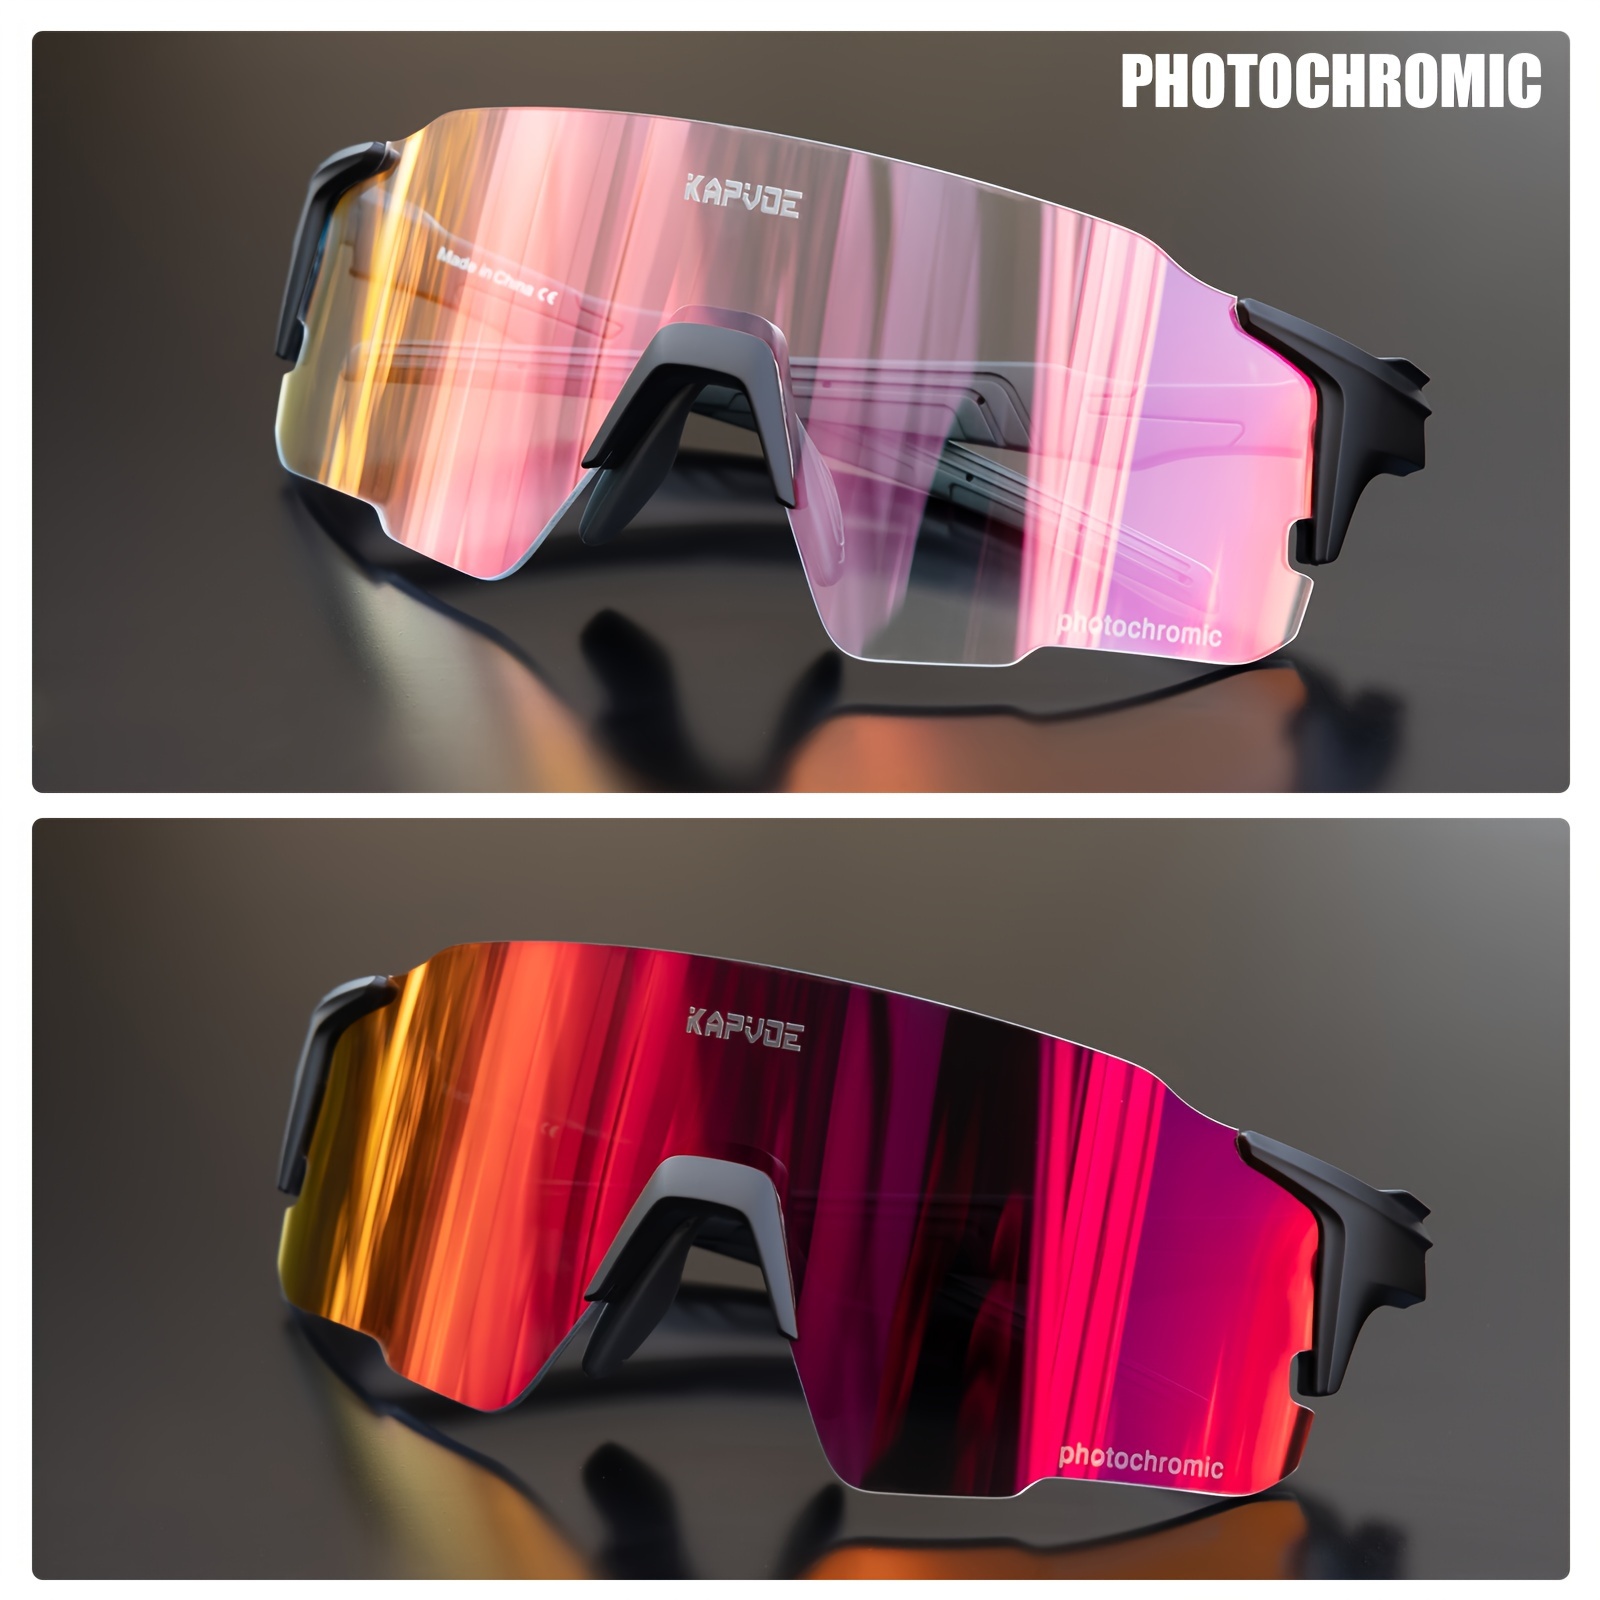 New Outdoor Sport Mirrored Sunglasses For Men And Women (unisex), With Pink  Lenses, Polarized, Photochromic, For Cycling, Fashion, Uv Protection, And  Sunblock